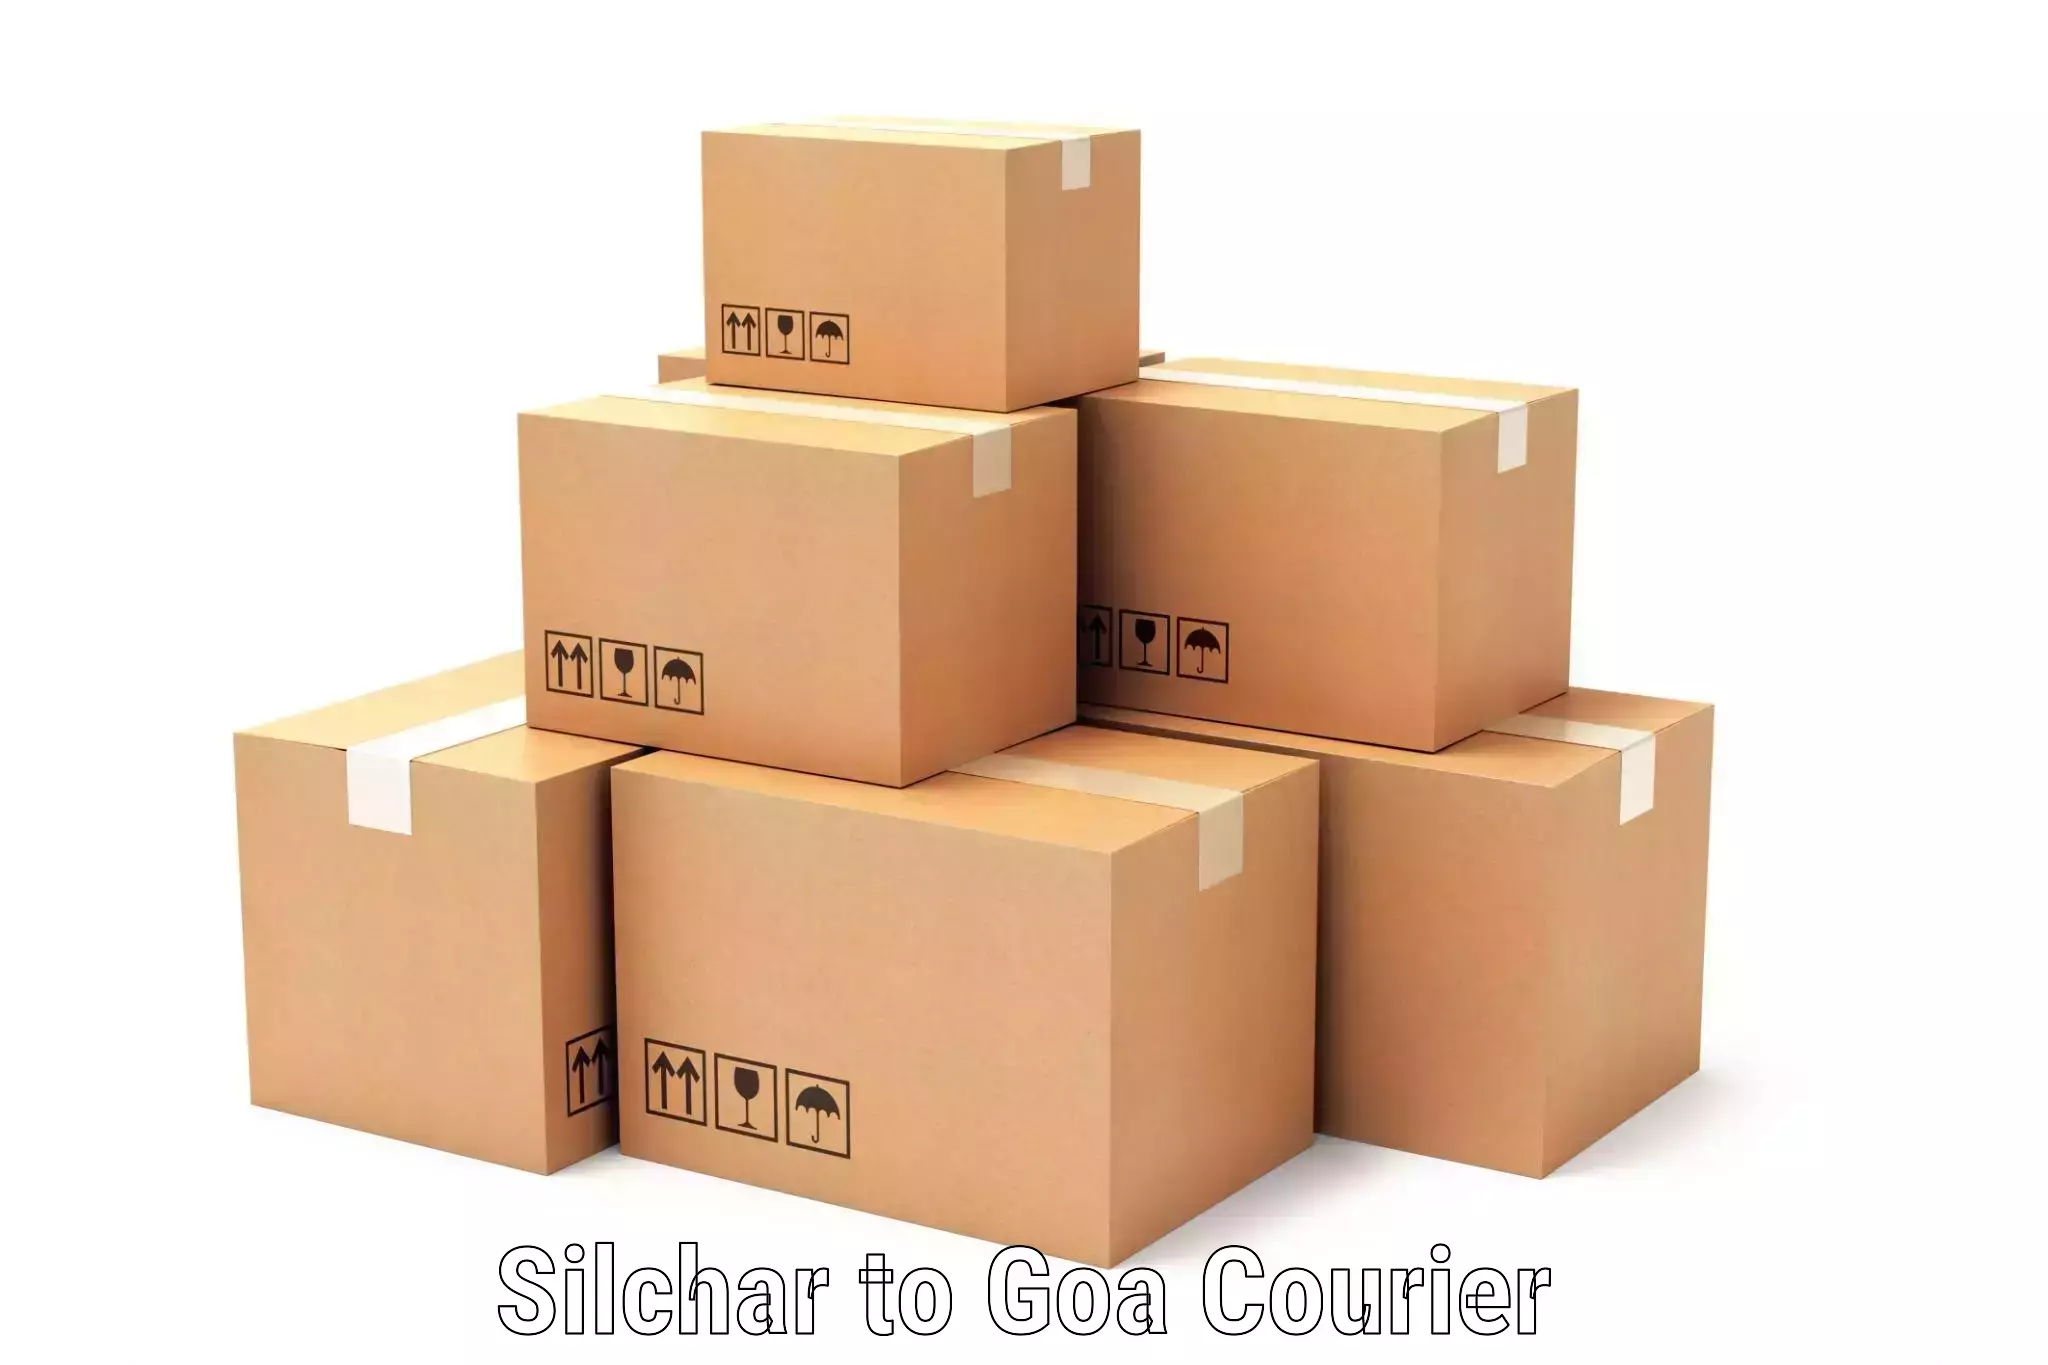 Global shipping networks Silchar to Goa